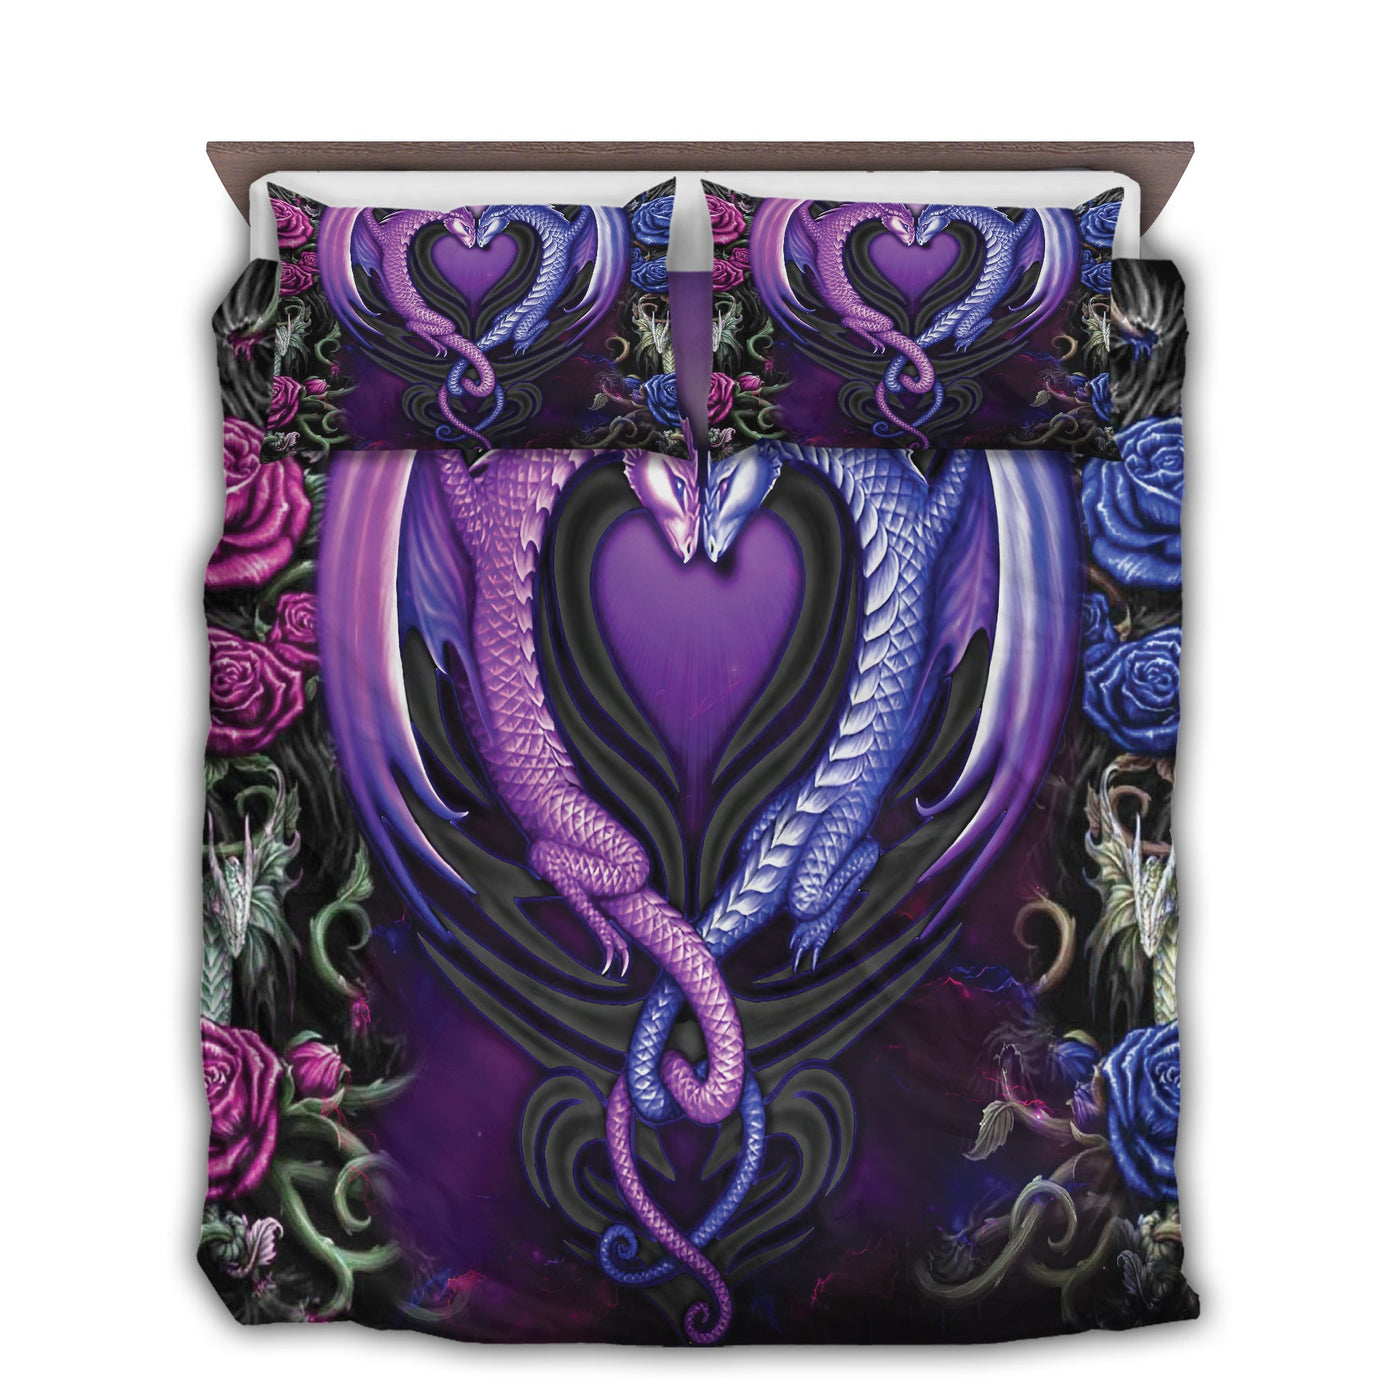 US / Twin (68" x 86") Dragon Couple Lover Together - Bedding Cover - Owls Matrix LTD